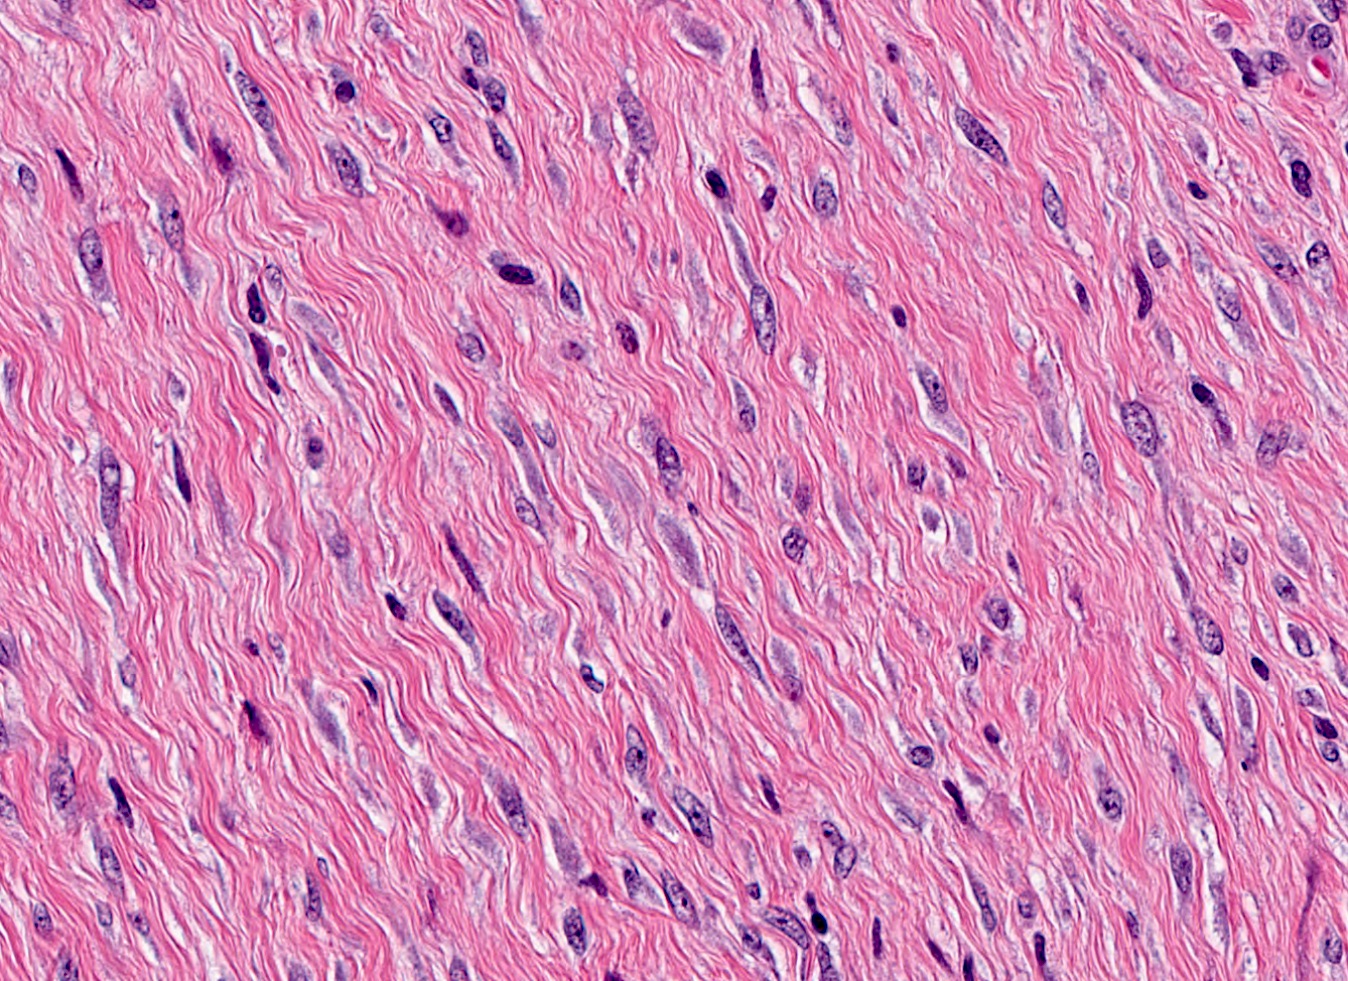 Bland spindle cells